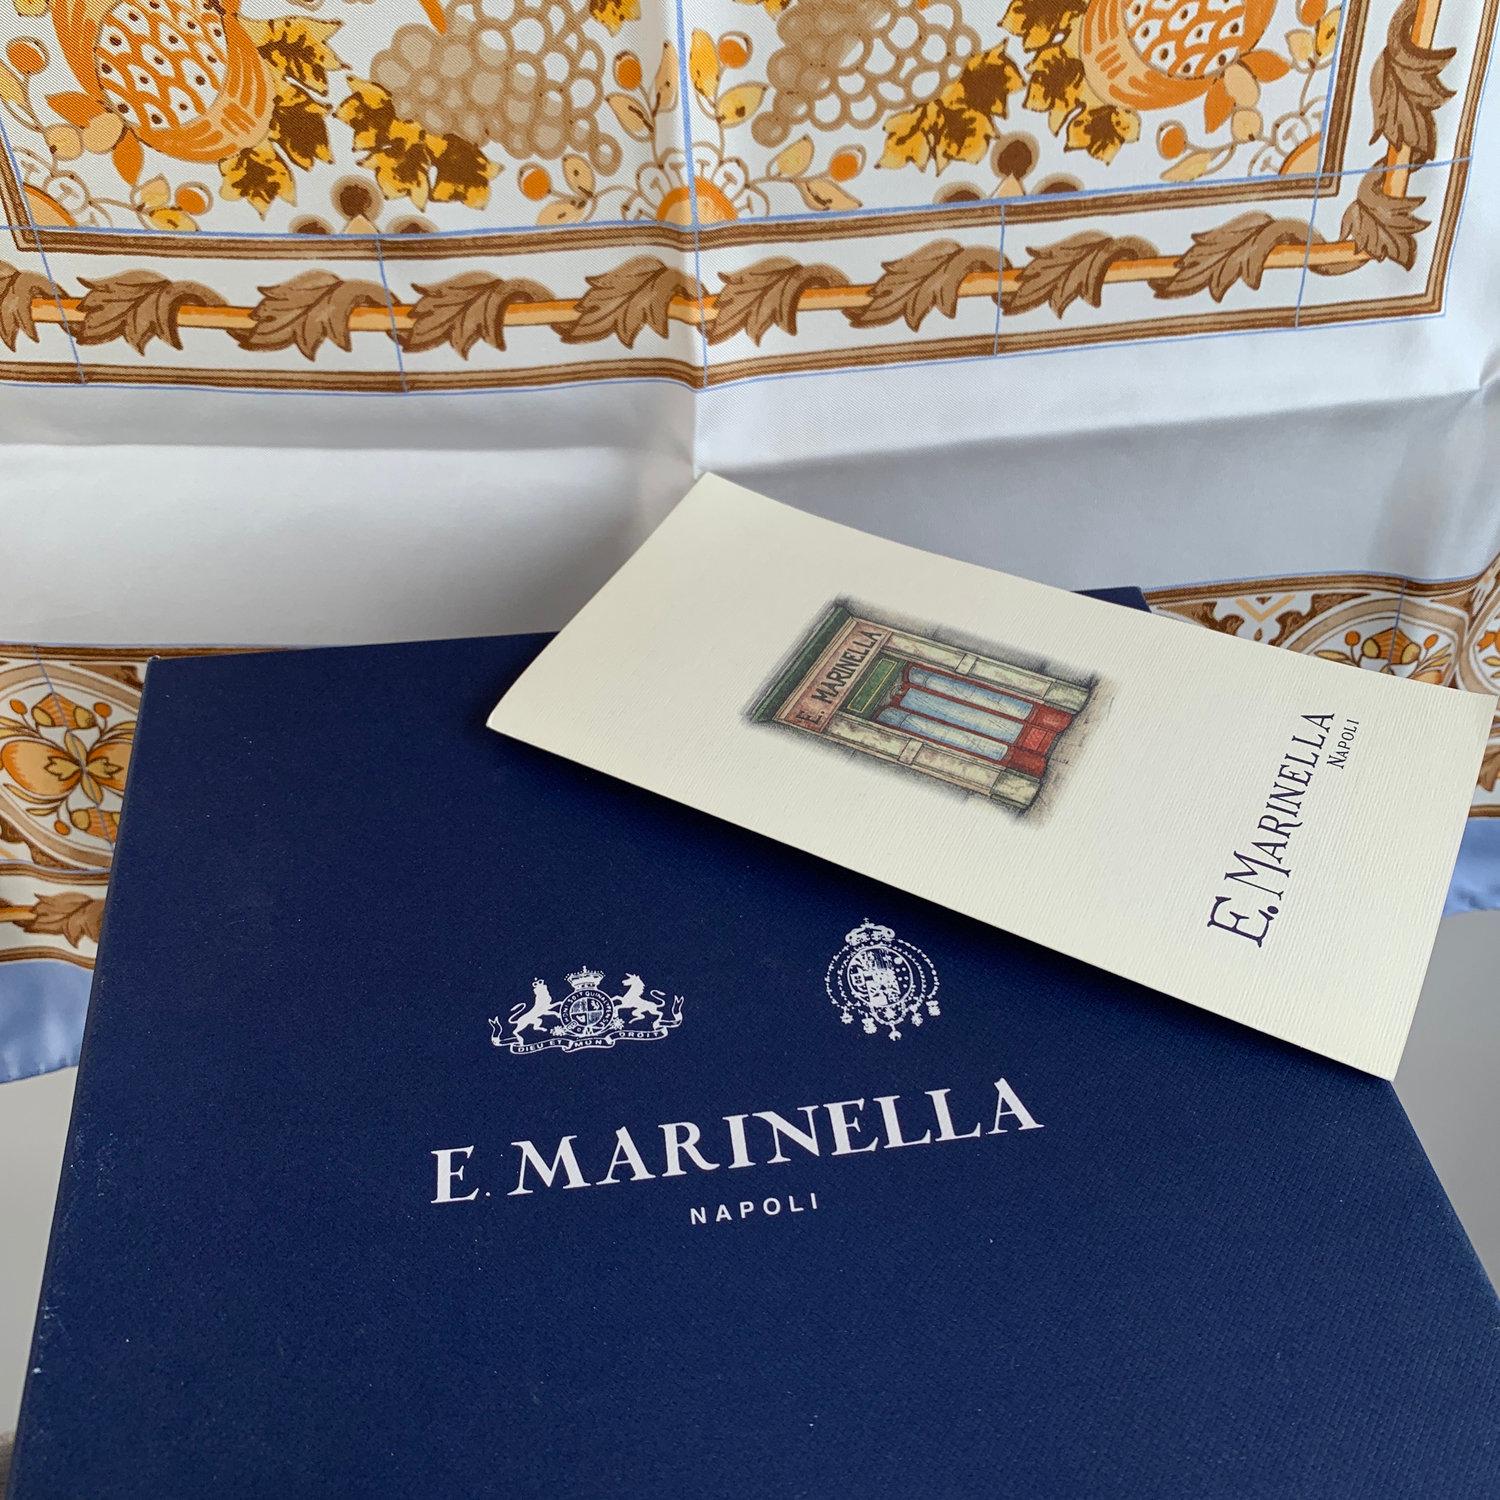 Silk scarf by E. Marinella Napoli. Made in Italy. Lighe blue border, with main beige and light brown tones. Featuring grapes pattern.It will come with its case and card. Size: 88 x 88 cm.



Details

MATERIAL: Silk

COLOR: Beige

MODEL: